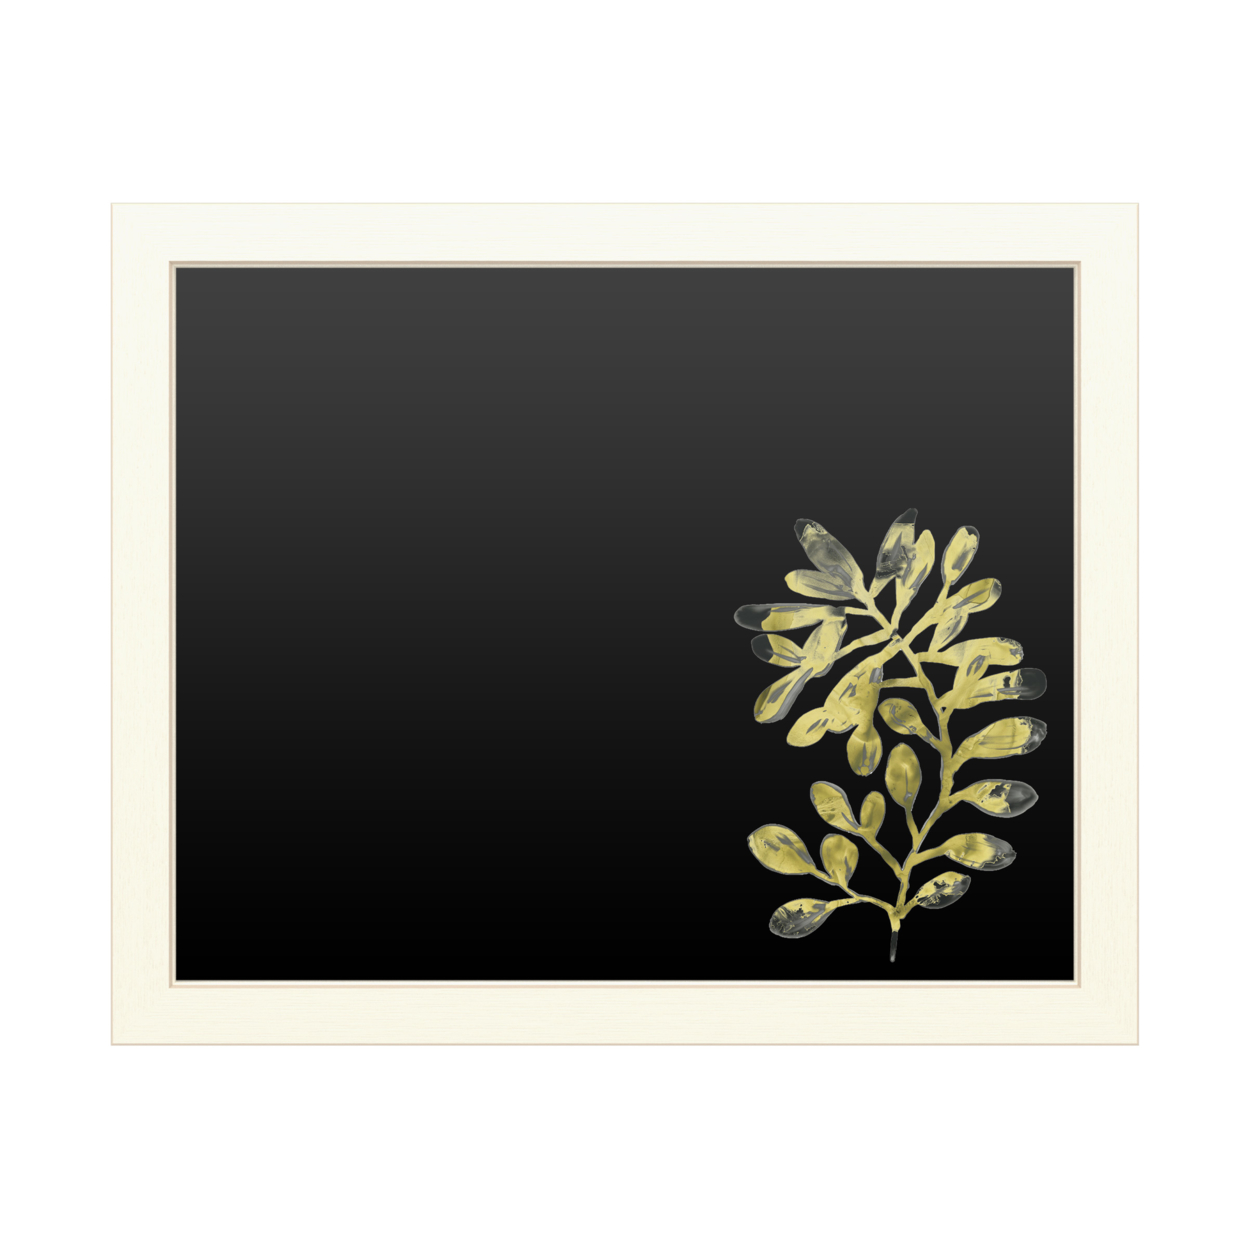 16 X 20 Chalk Board With Printed Artwork - June Erica Vess Foliage Fossil Ii White Board - Ready To Hang Chalkboard